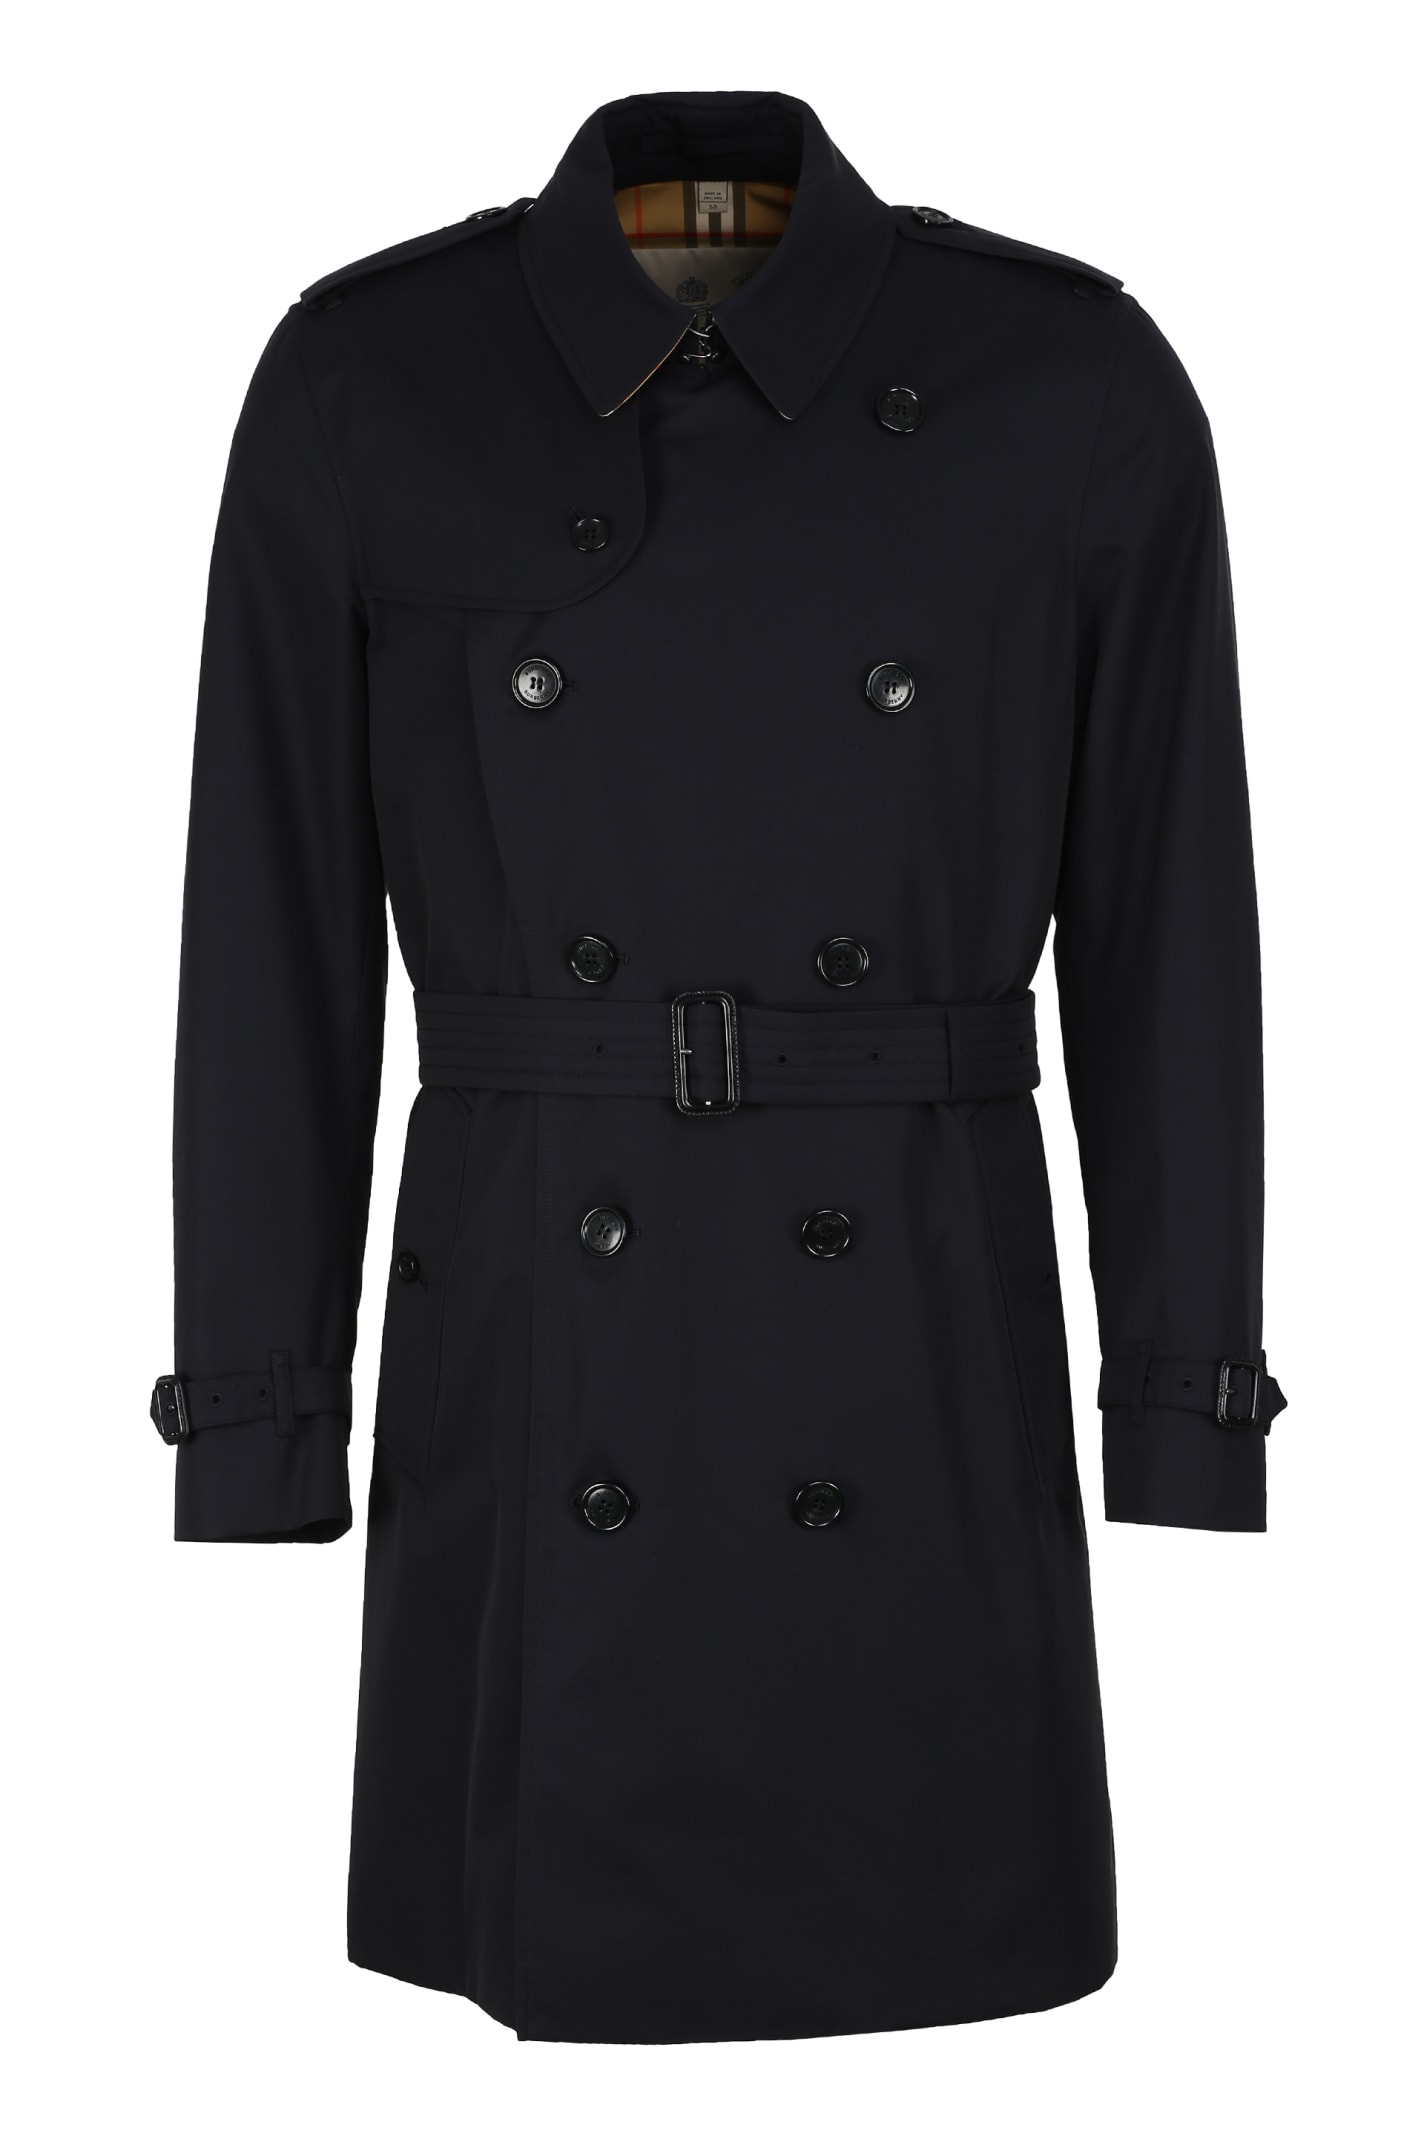 BURBERRY COTTON TRENCH COAT,8028105DK A1177